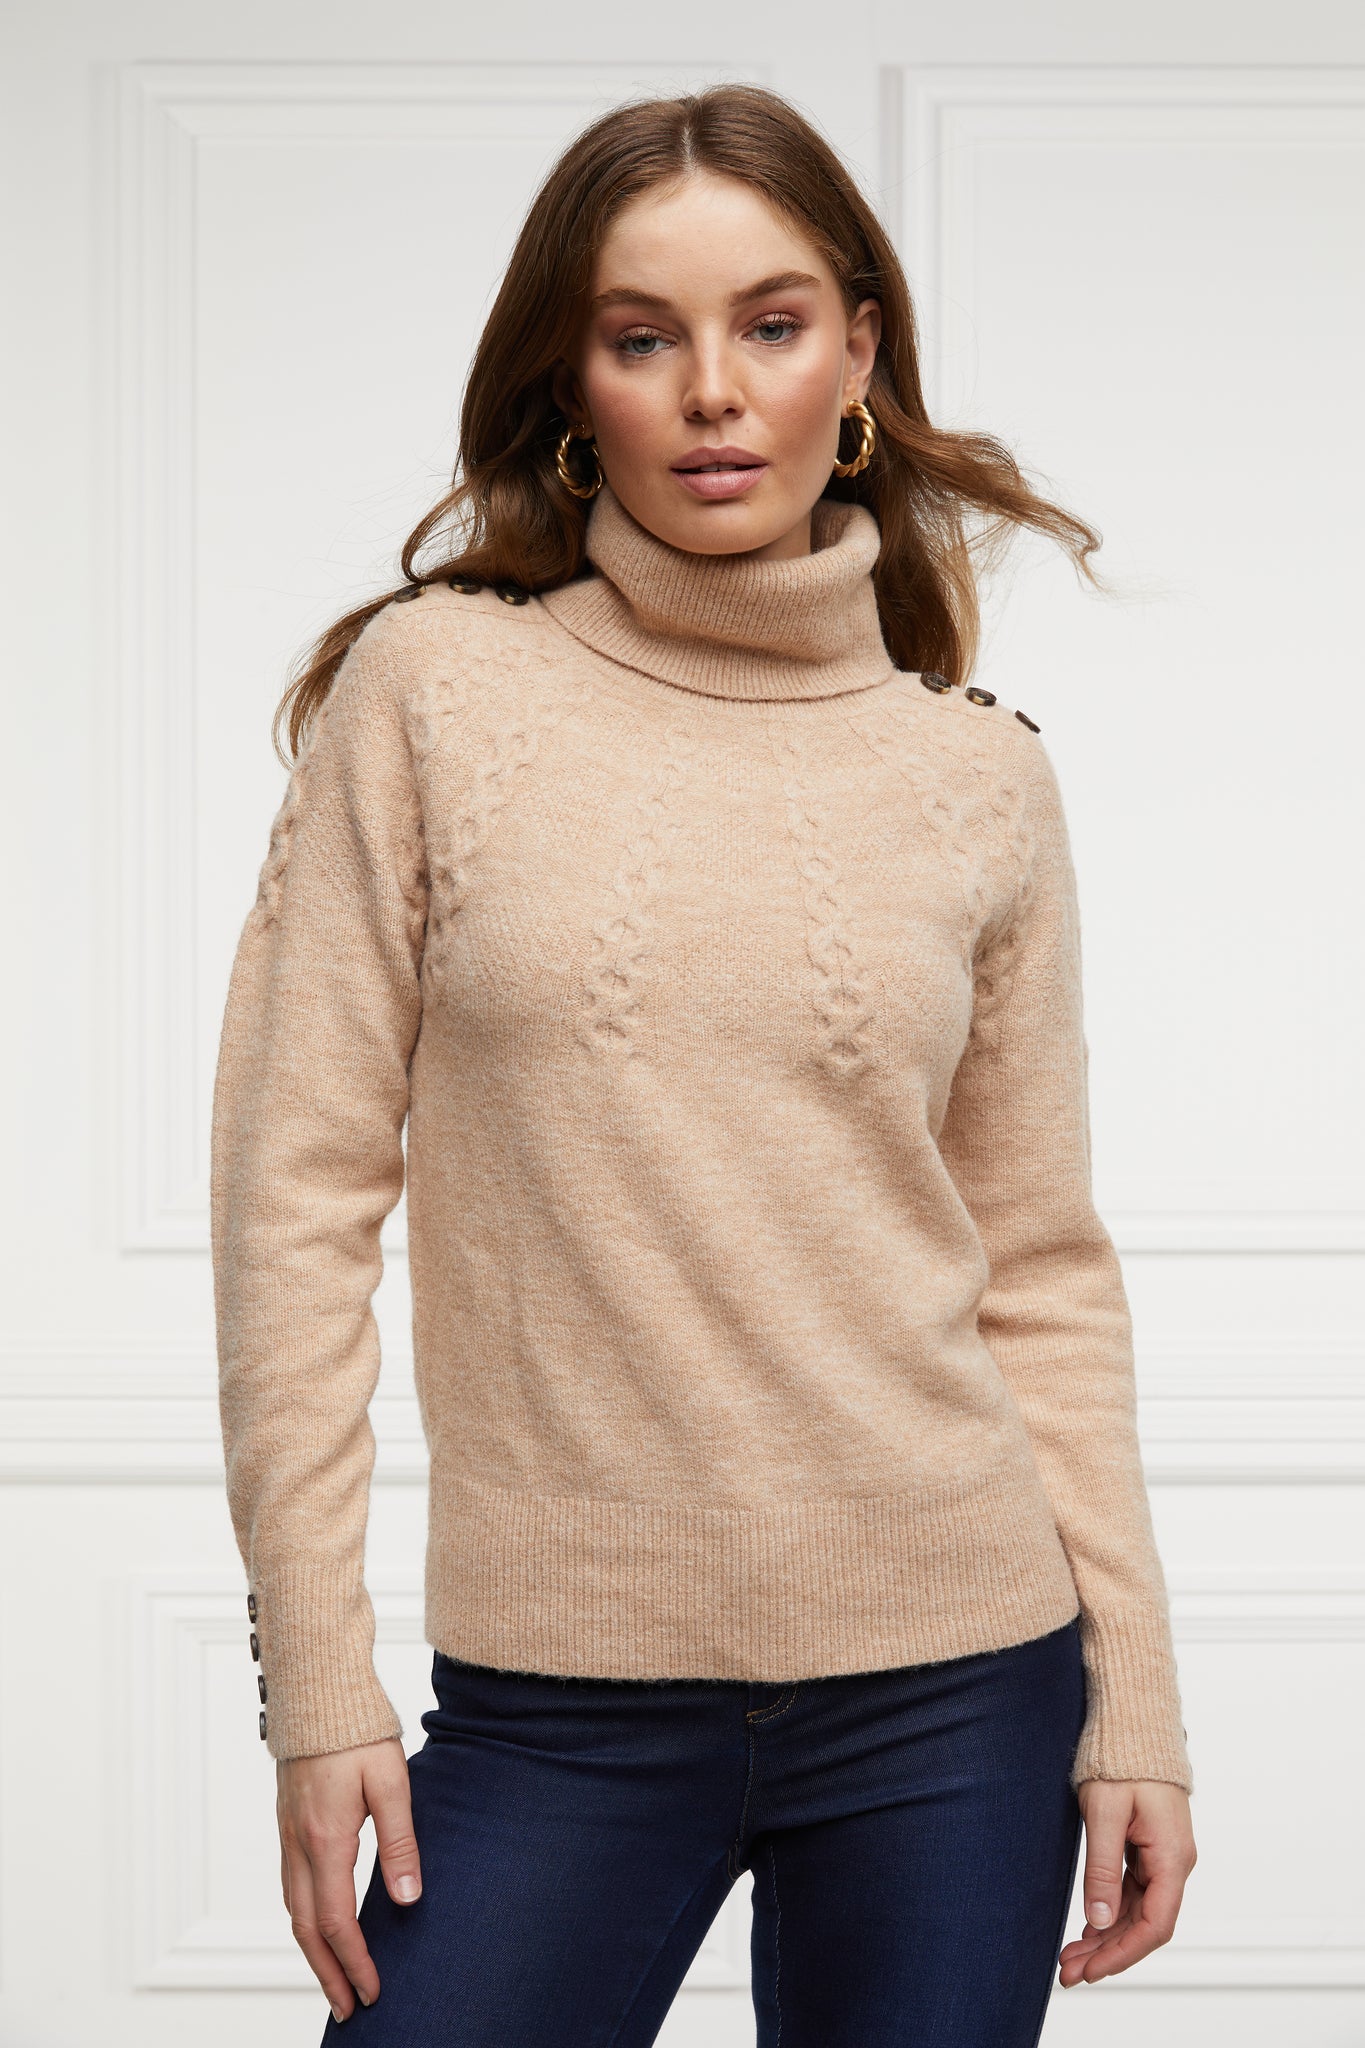 chunky knit roll neck jumper in camel with textured knit detailing and horn buttons across both shoulders